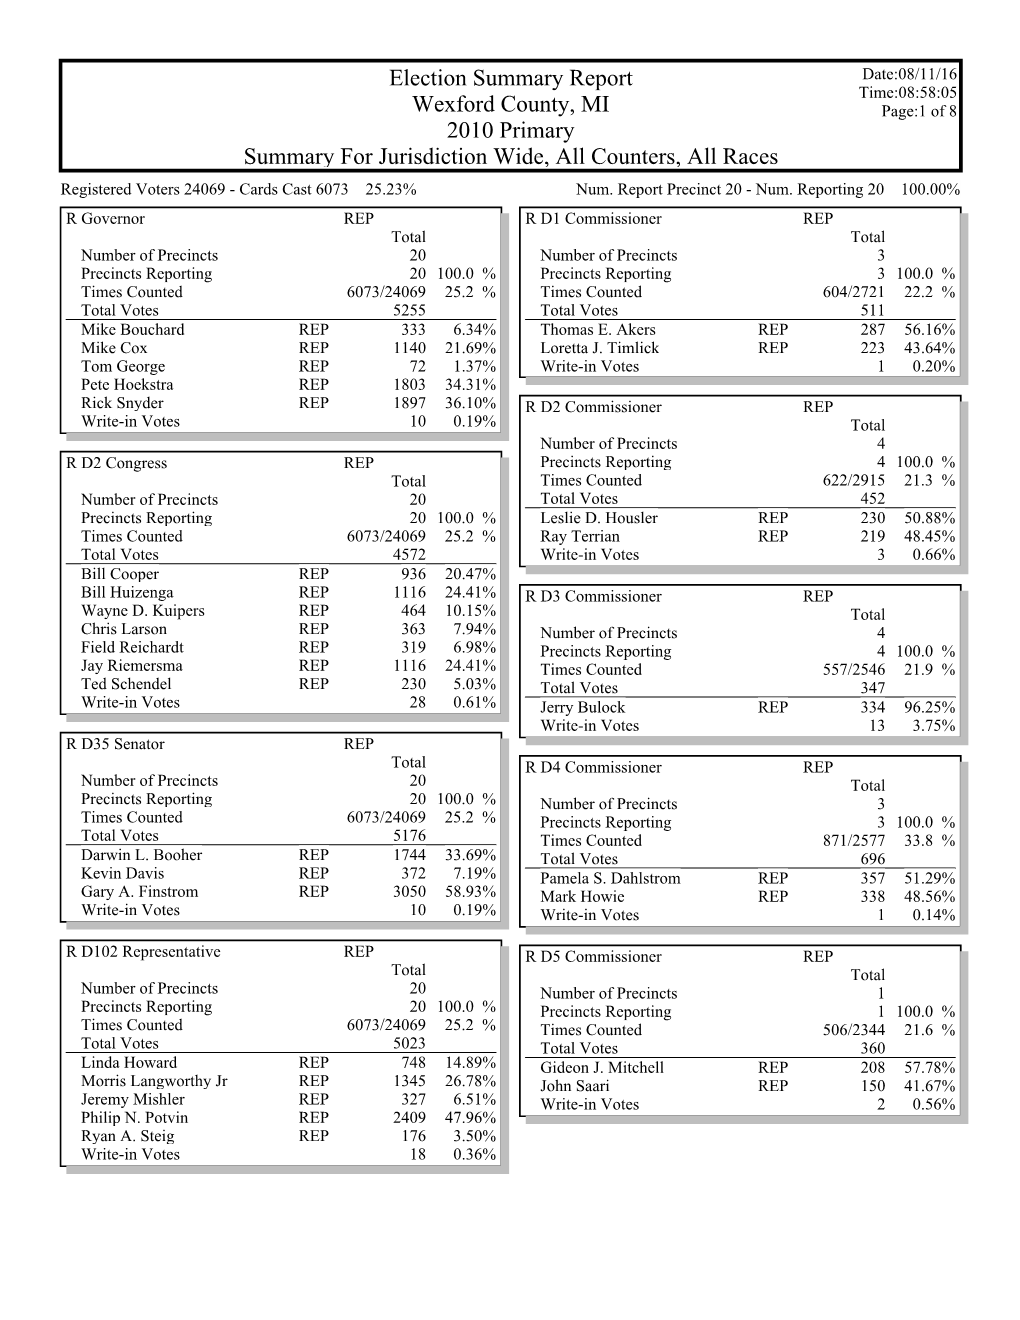 2010 Primary Election Results